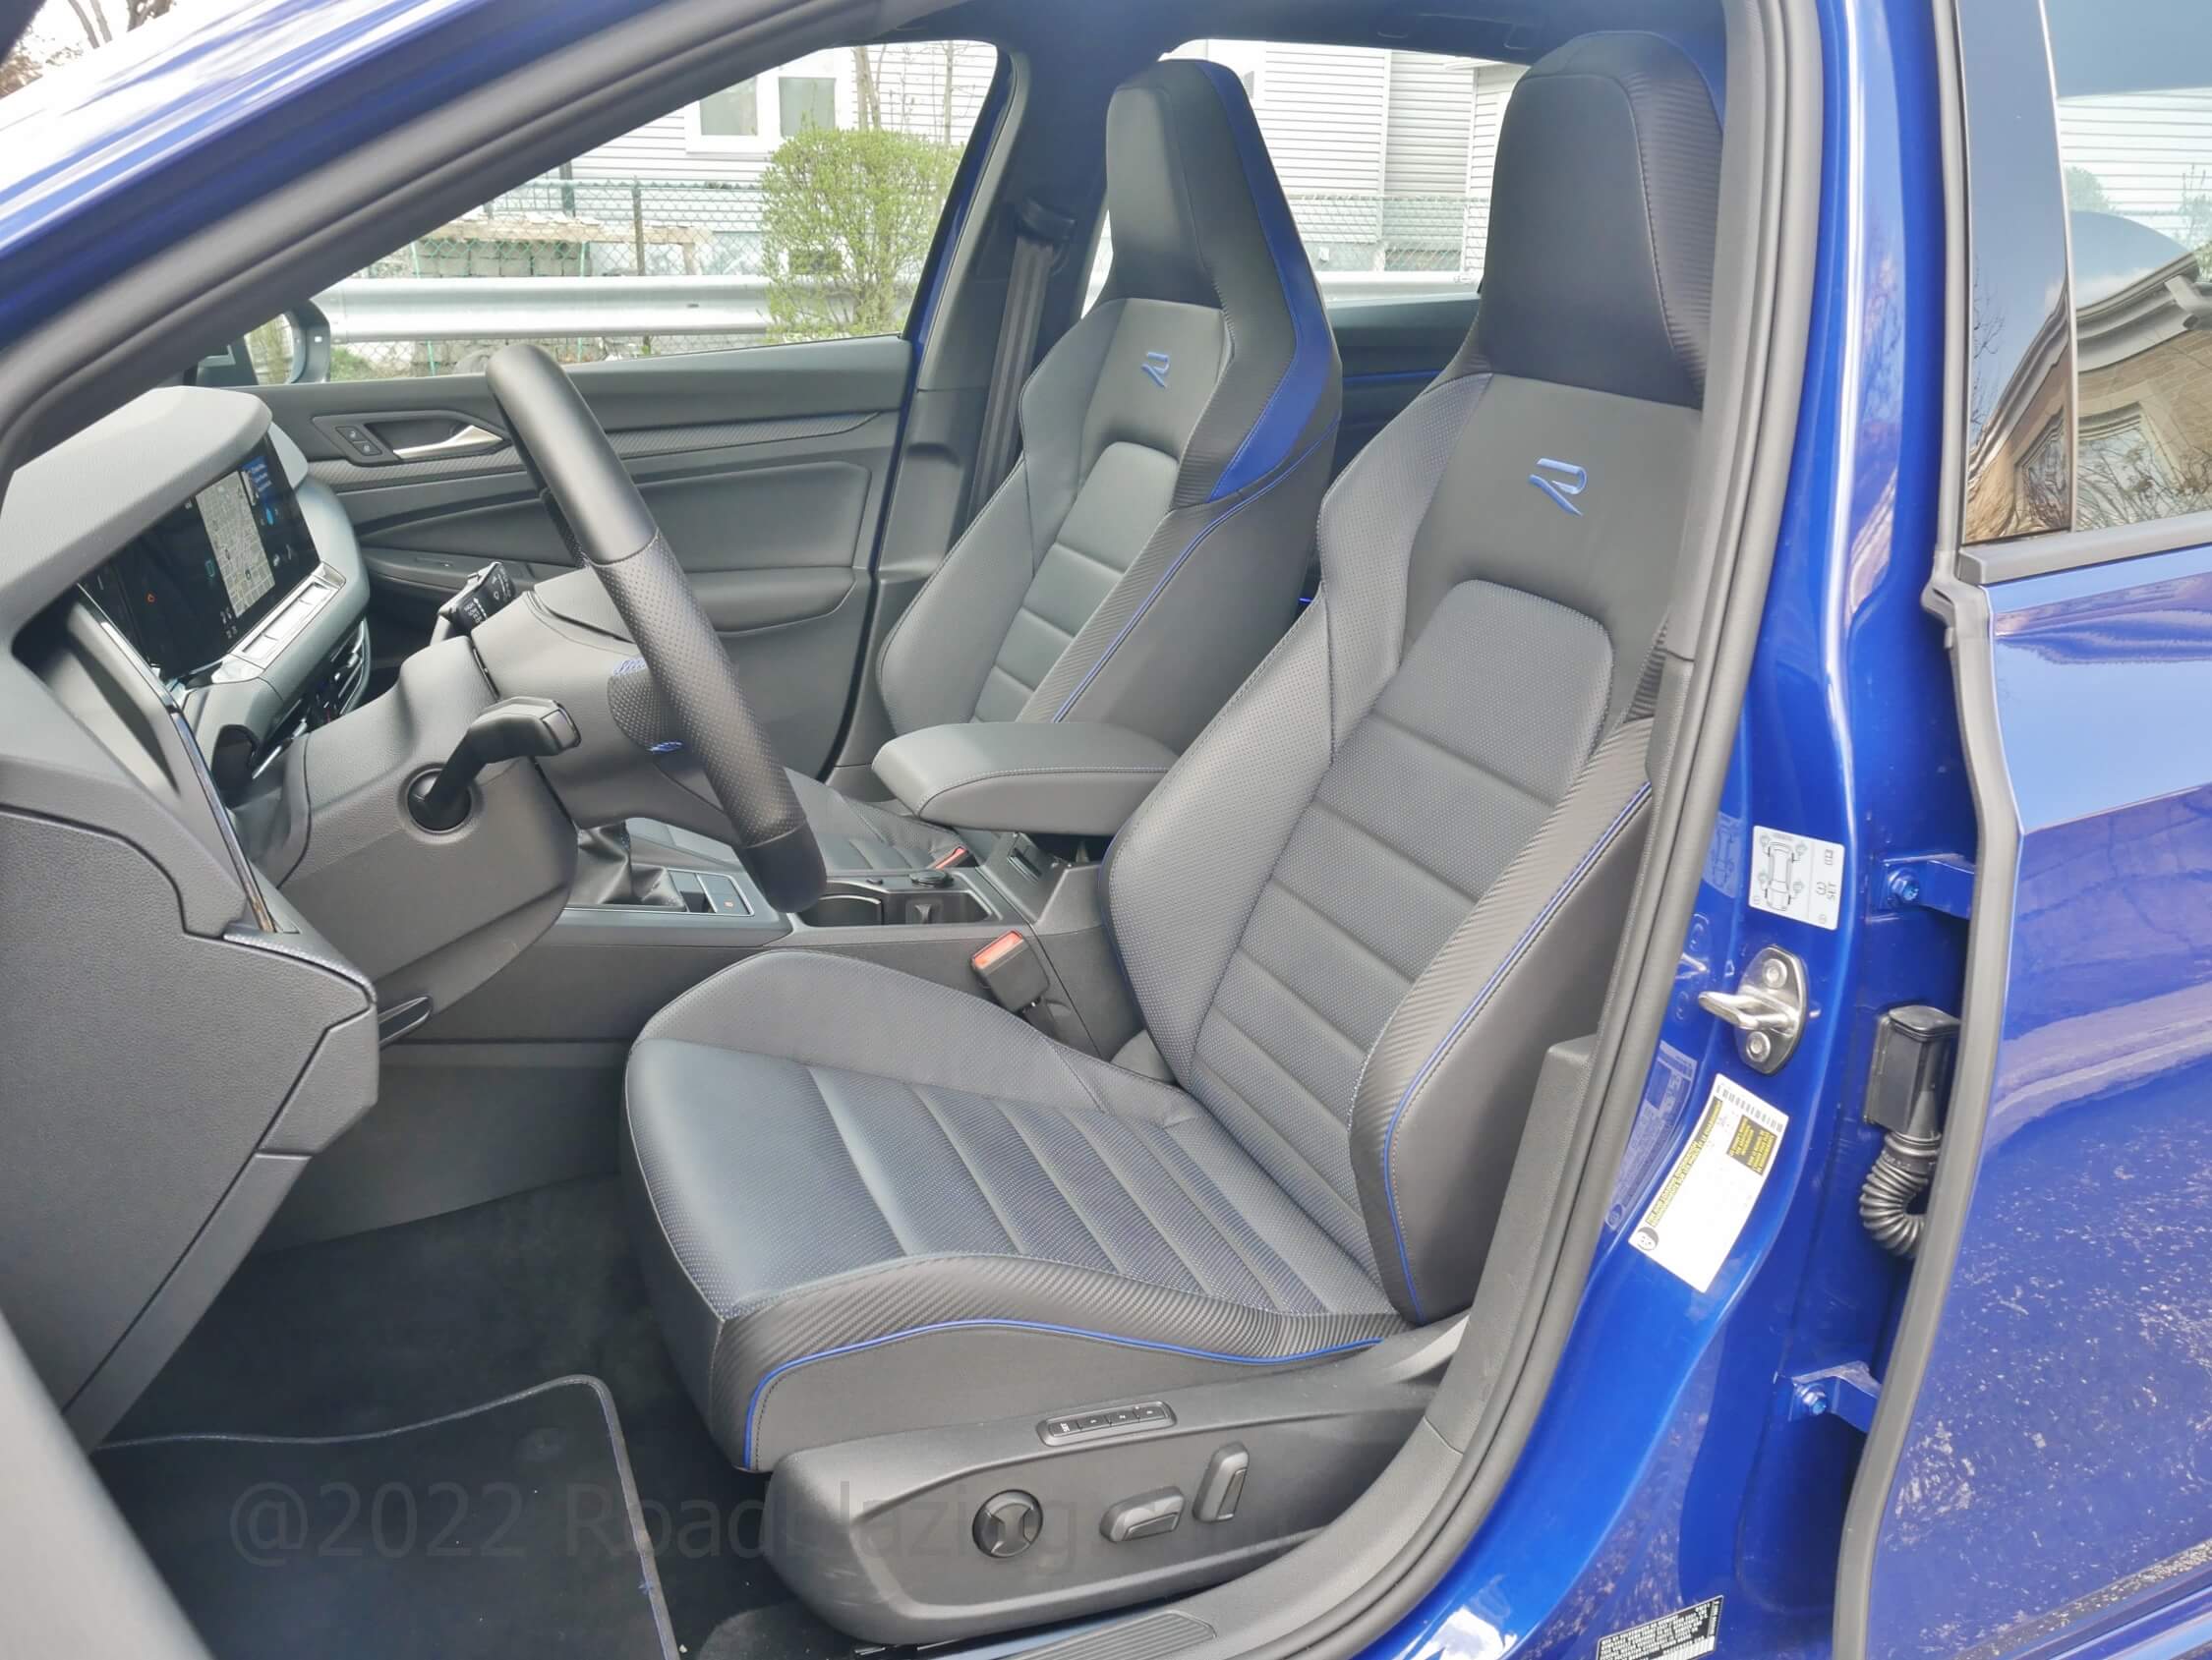 2022 Volkswagen Golf R: power adjusting heated & cooled supportive leather sport bucket seats w/ heated steering wheel